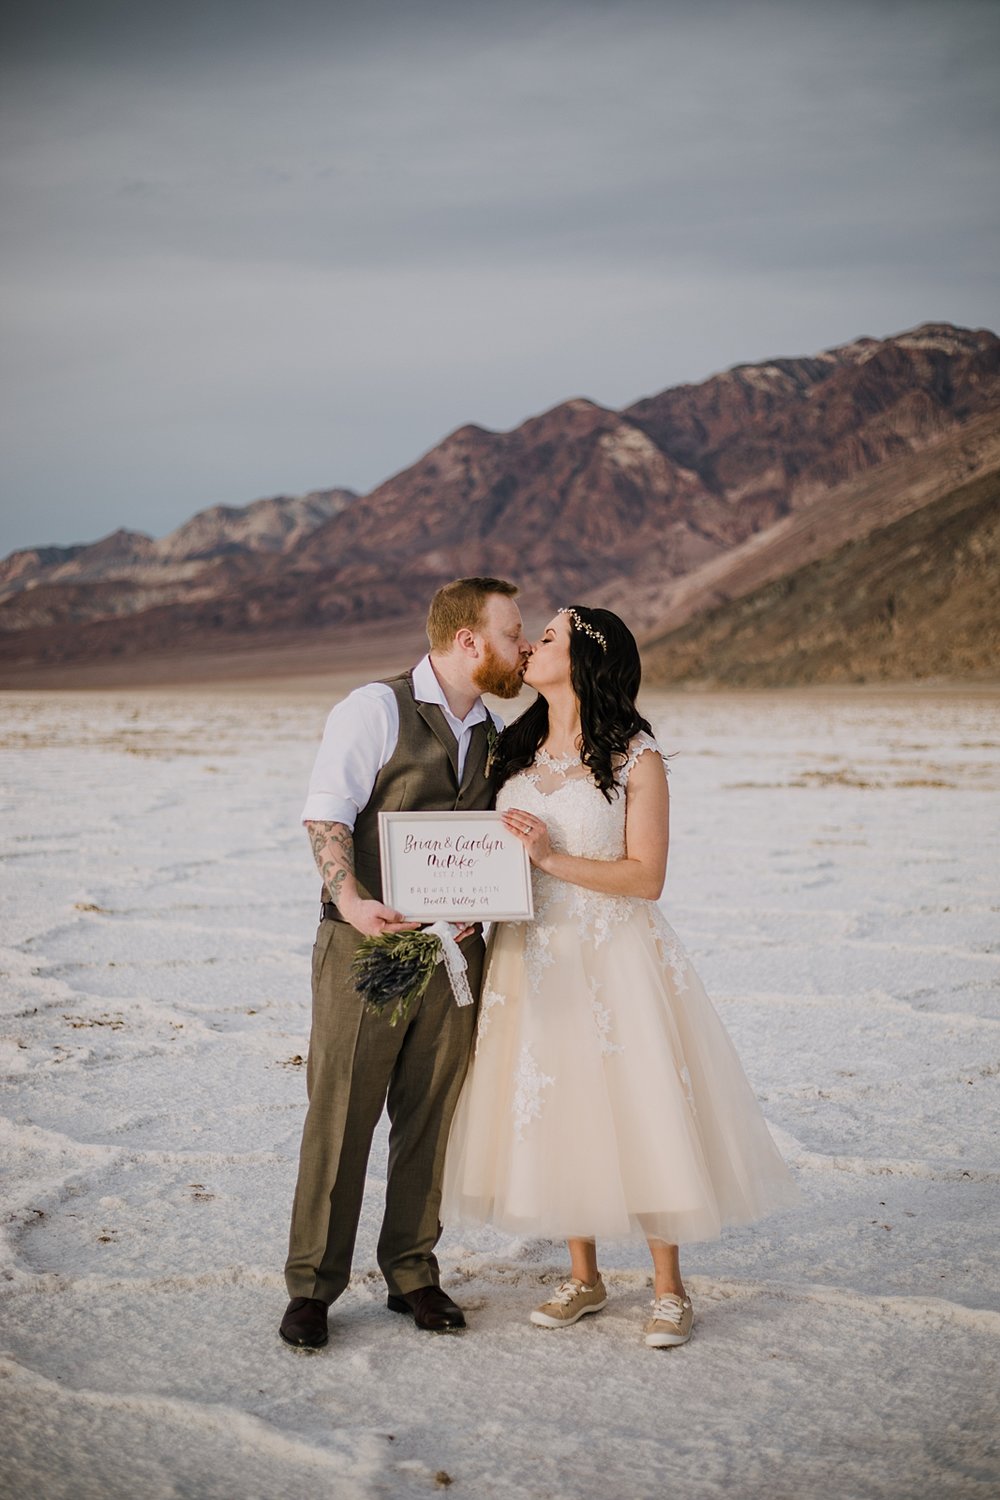 handmade elopement sign, death valley national park elopement, elope in death valley, badwater basin elopement, hiking in death valley national park, sunset at badwater basin